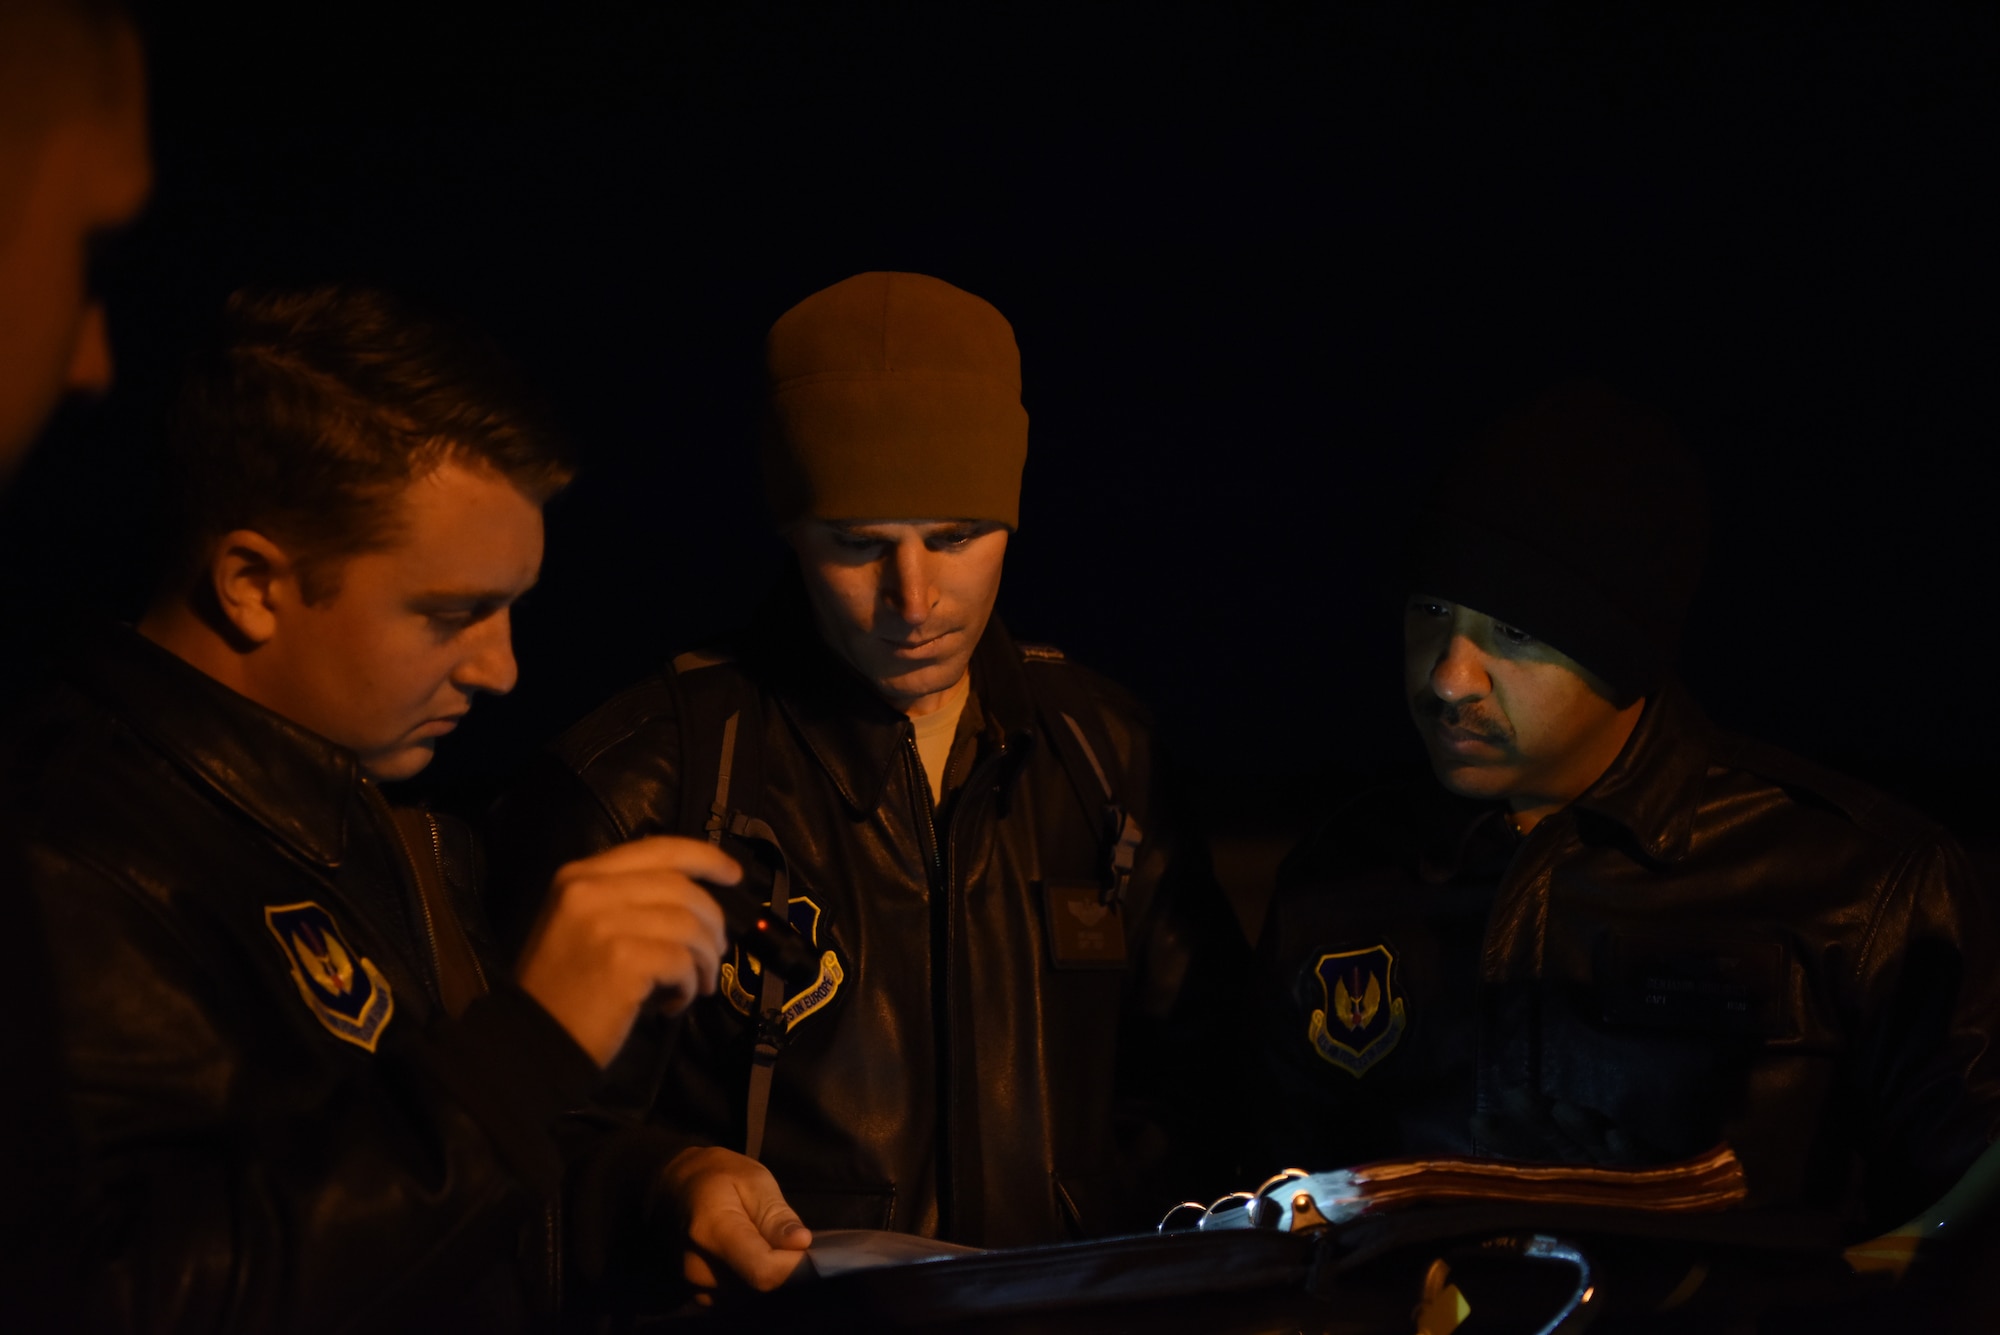 A KC-135 Stratotanker crew reviews pre-flight checklists at RAF Mildenhall, England, March 11, 2019. The crew was involved in training with Romanian air force F-16s over the skies of Romania which enhanced regional capabilities to secure air sovereignty and promote peace and security through cooperation, collaboration, interoperability with NATO partners and other allies in the region. (U.S. Air Force photo by Airman 1st Class Brandon Esau)